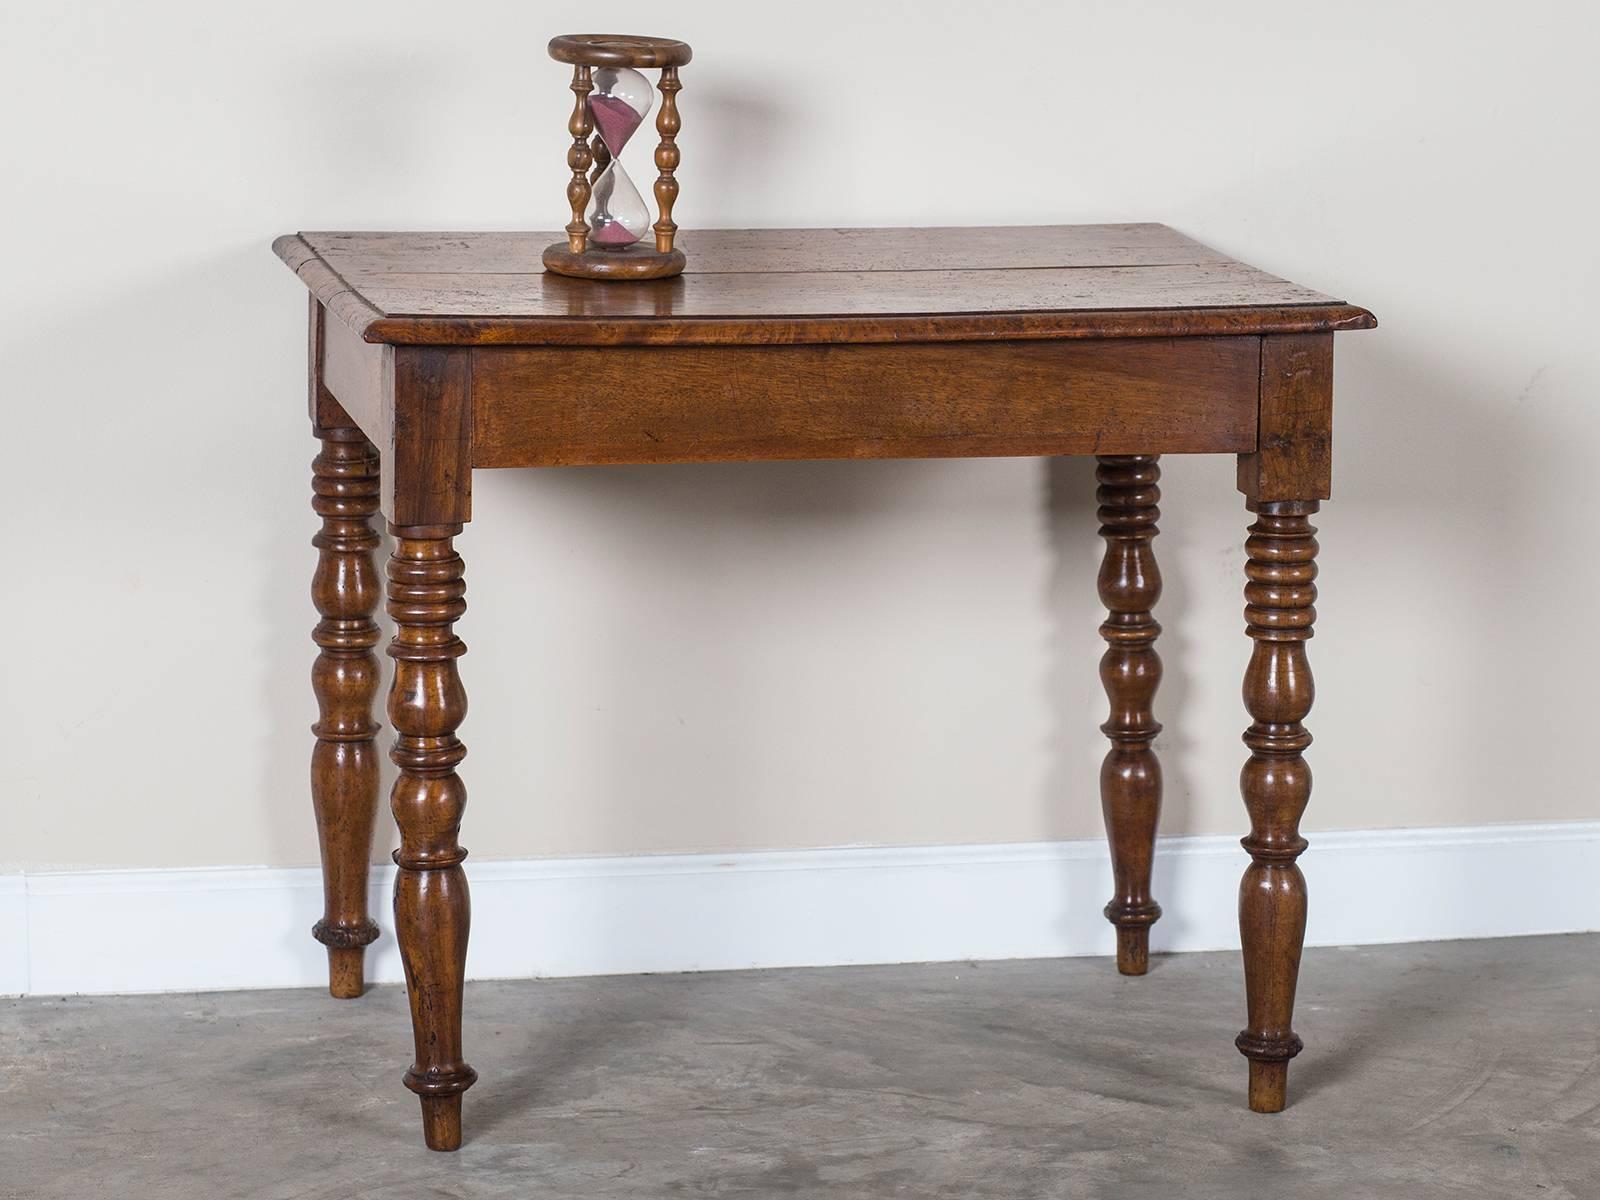 Receive our new selections direct from 1stdibs by email each week. Please click on “Follow Dealer” button below and see them first!

A handsome French Louis Philippe burl chestnut table, circa 1850. Please look at both the luscious timber used in